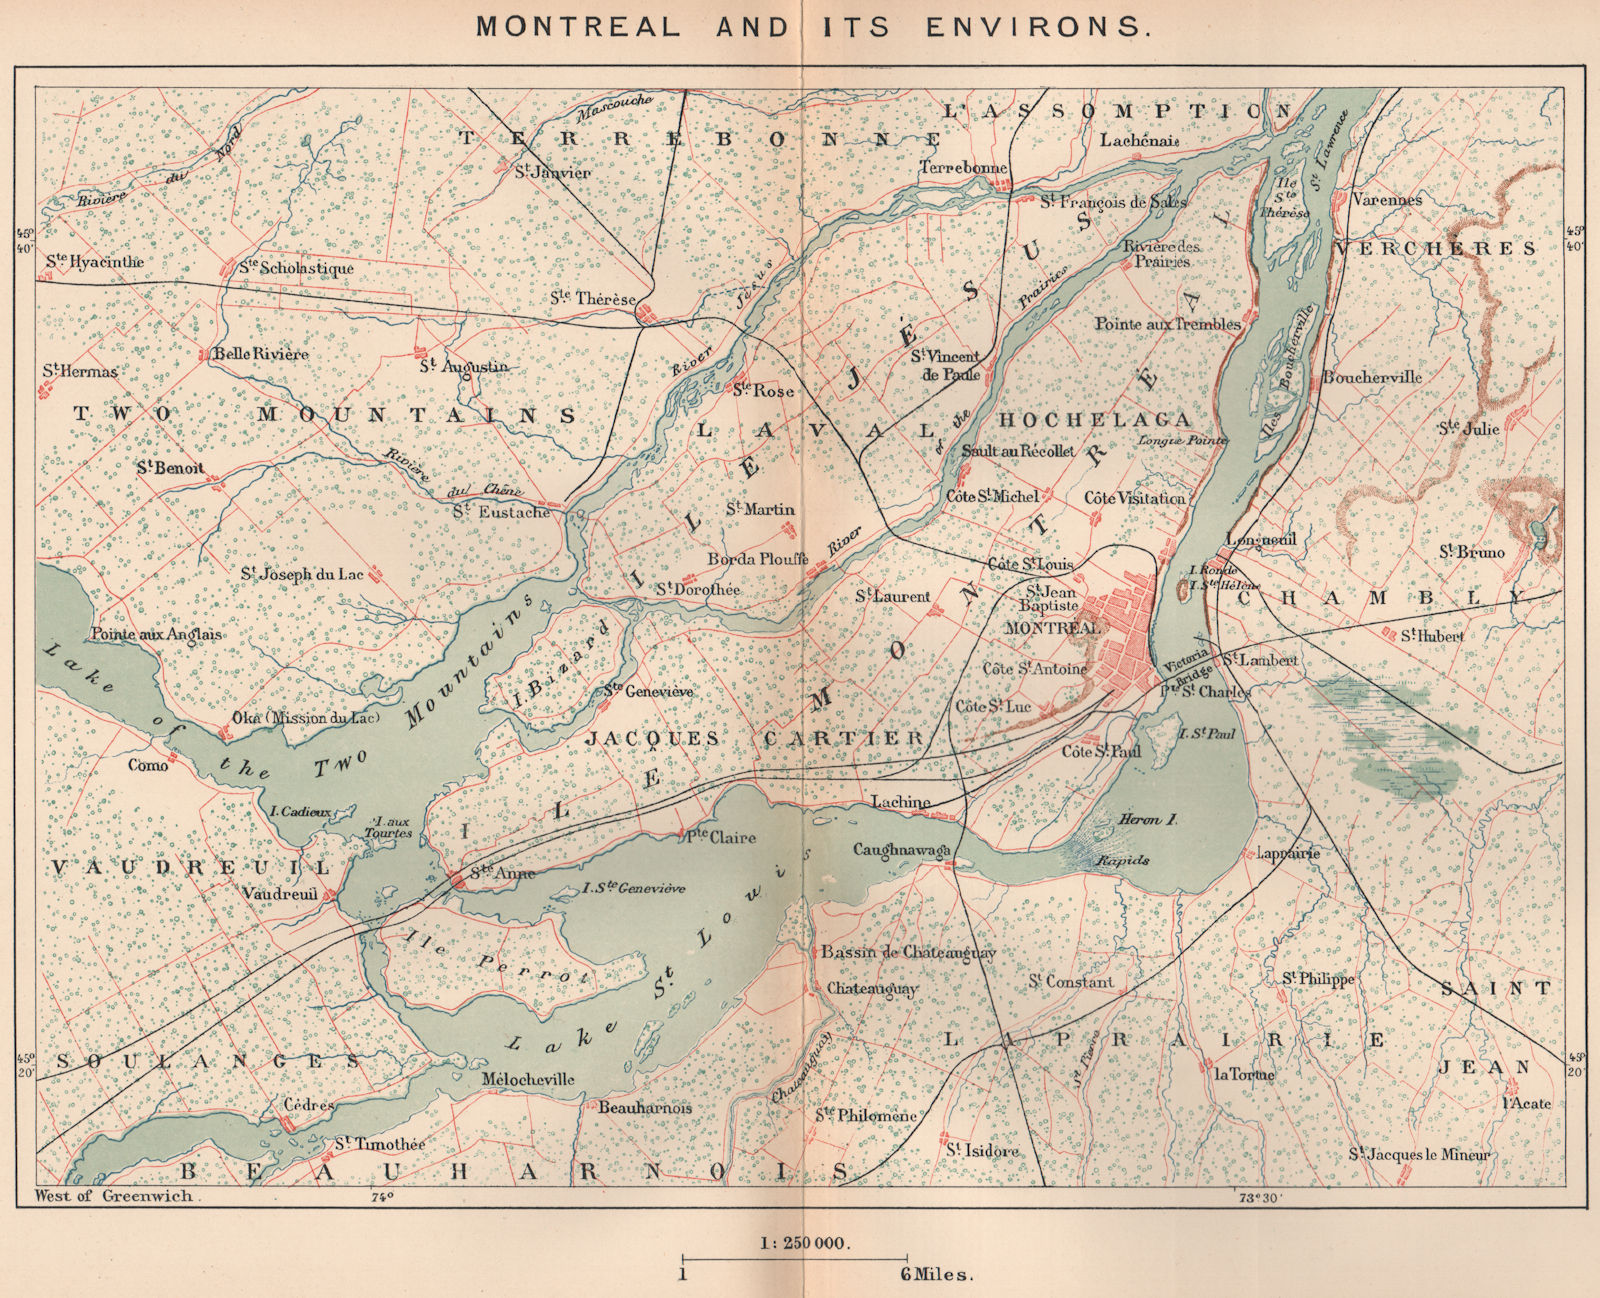 Montreal and its environs. Canada 1885 old antique vintage map plan chart